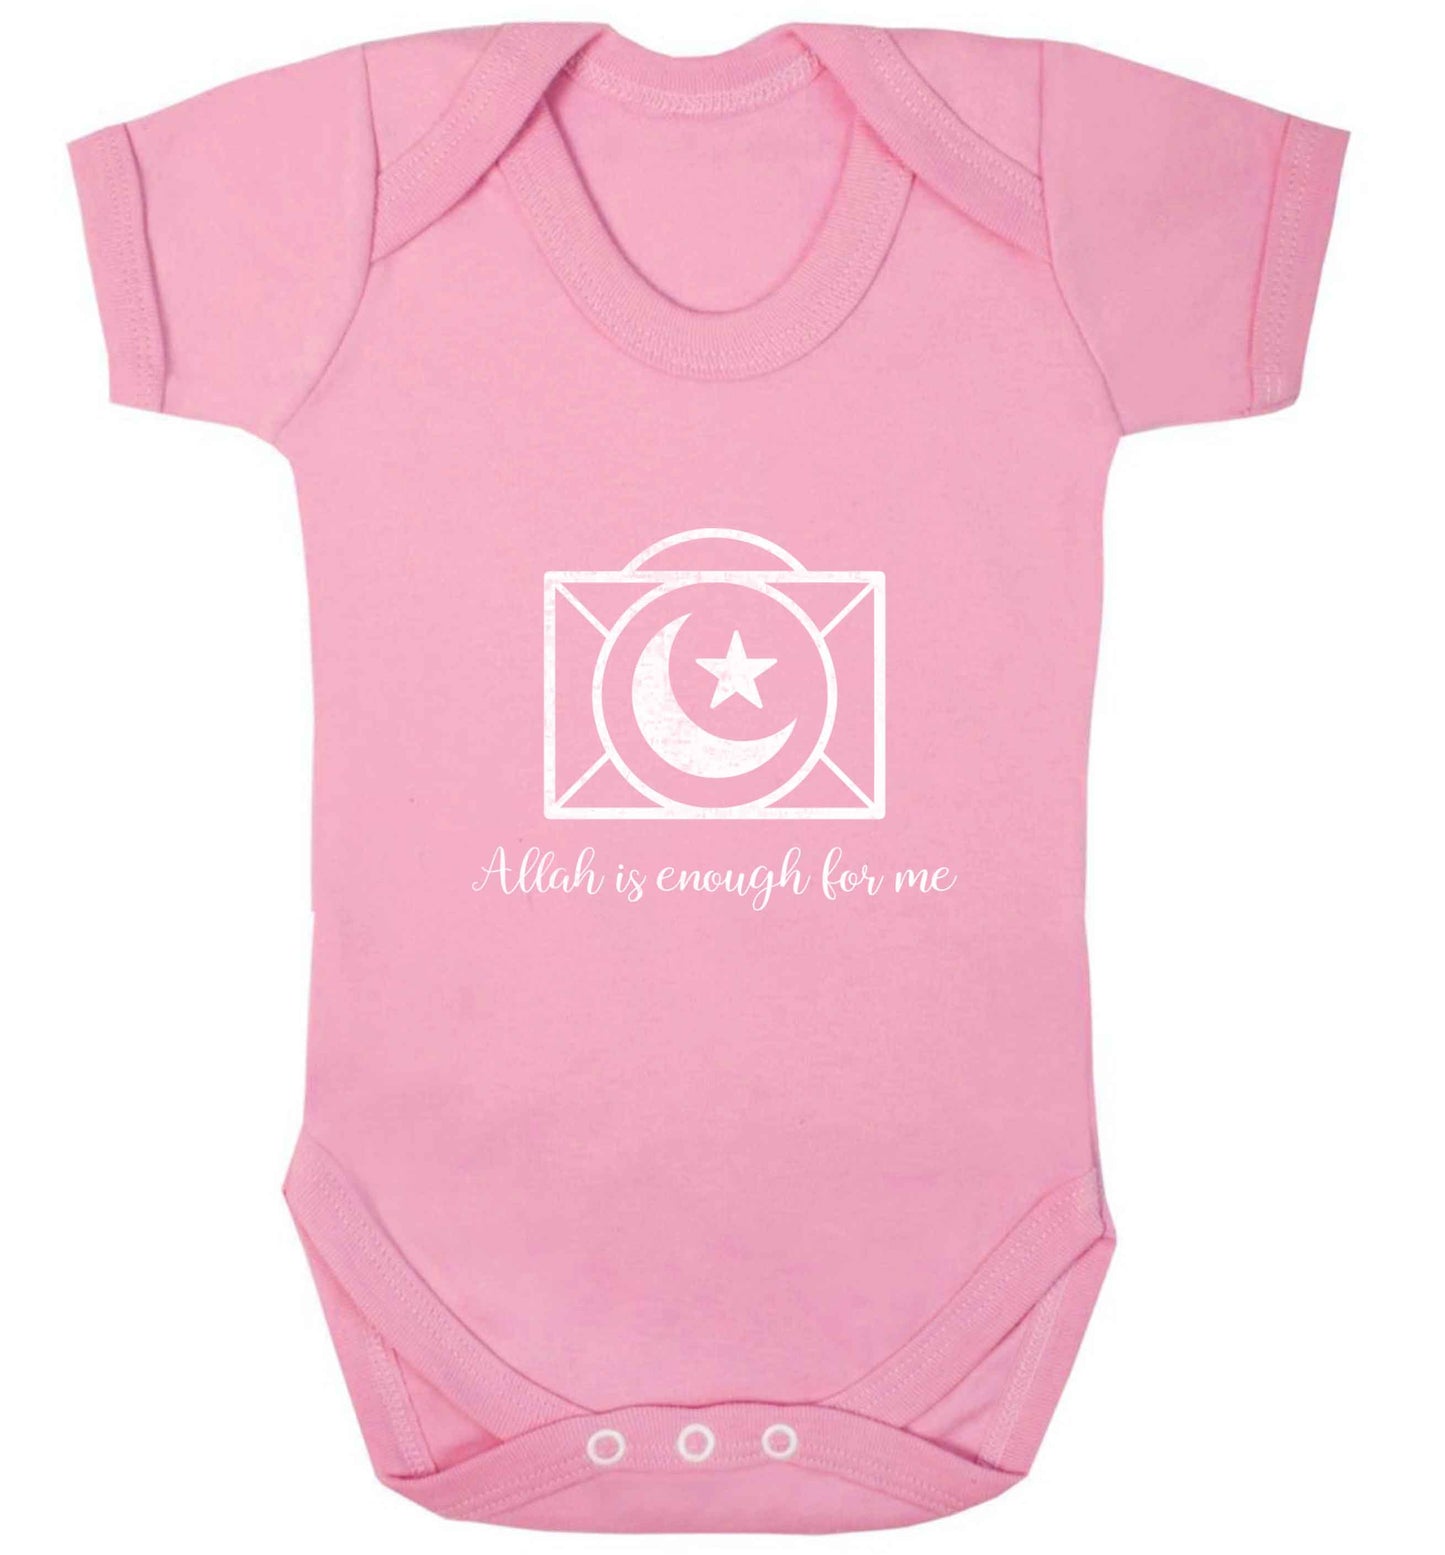 Allah is enough for me baby vest pale pink 18-24 months